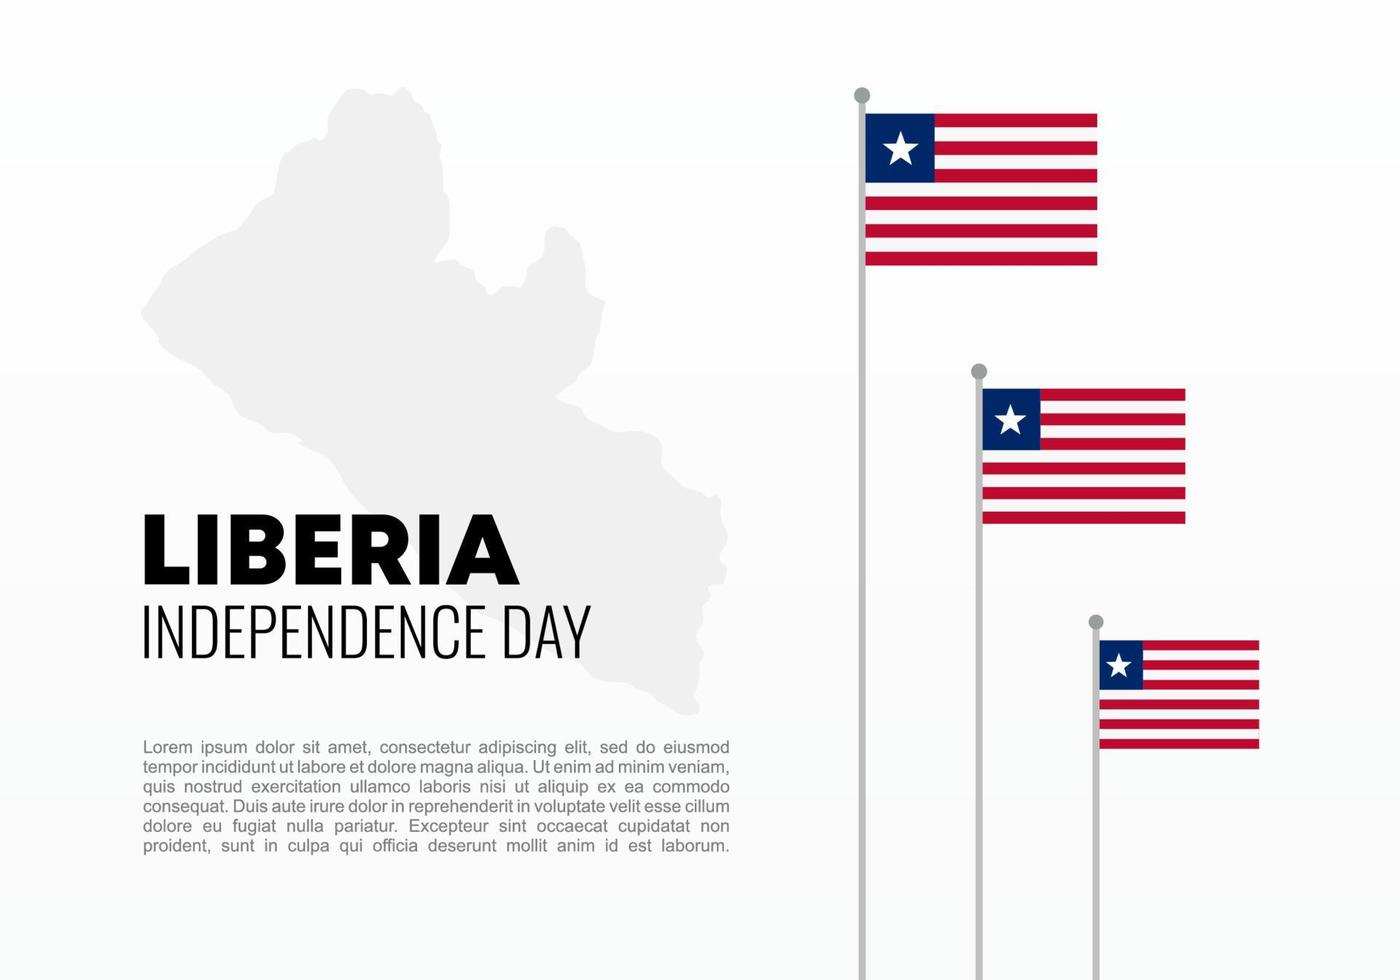 Liberia independence day for national celebration on July 26 th. vector